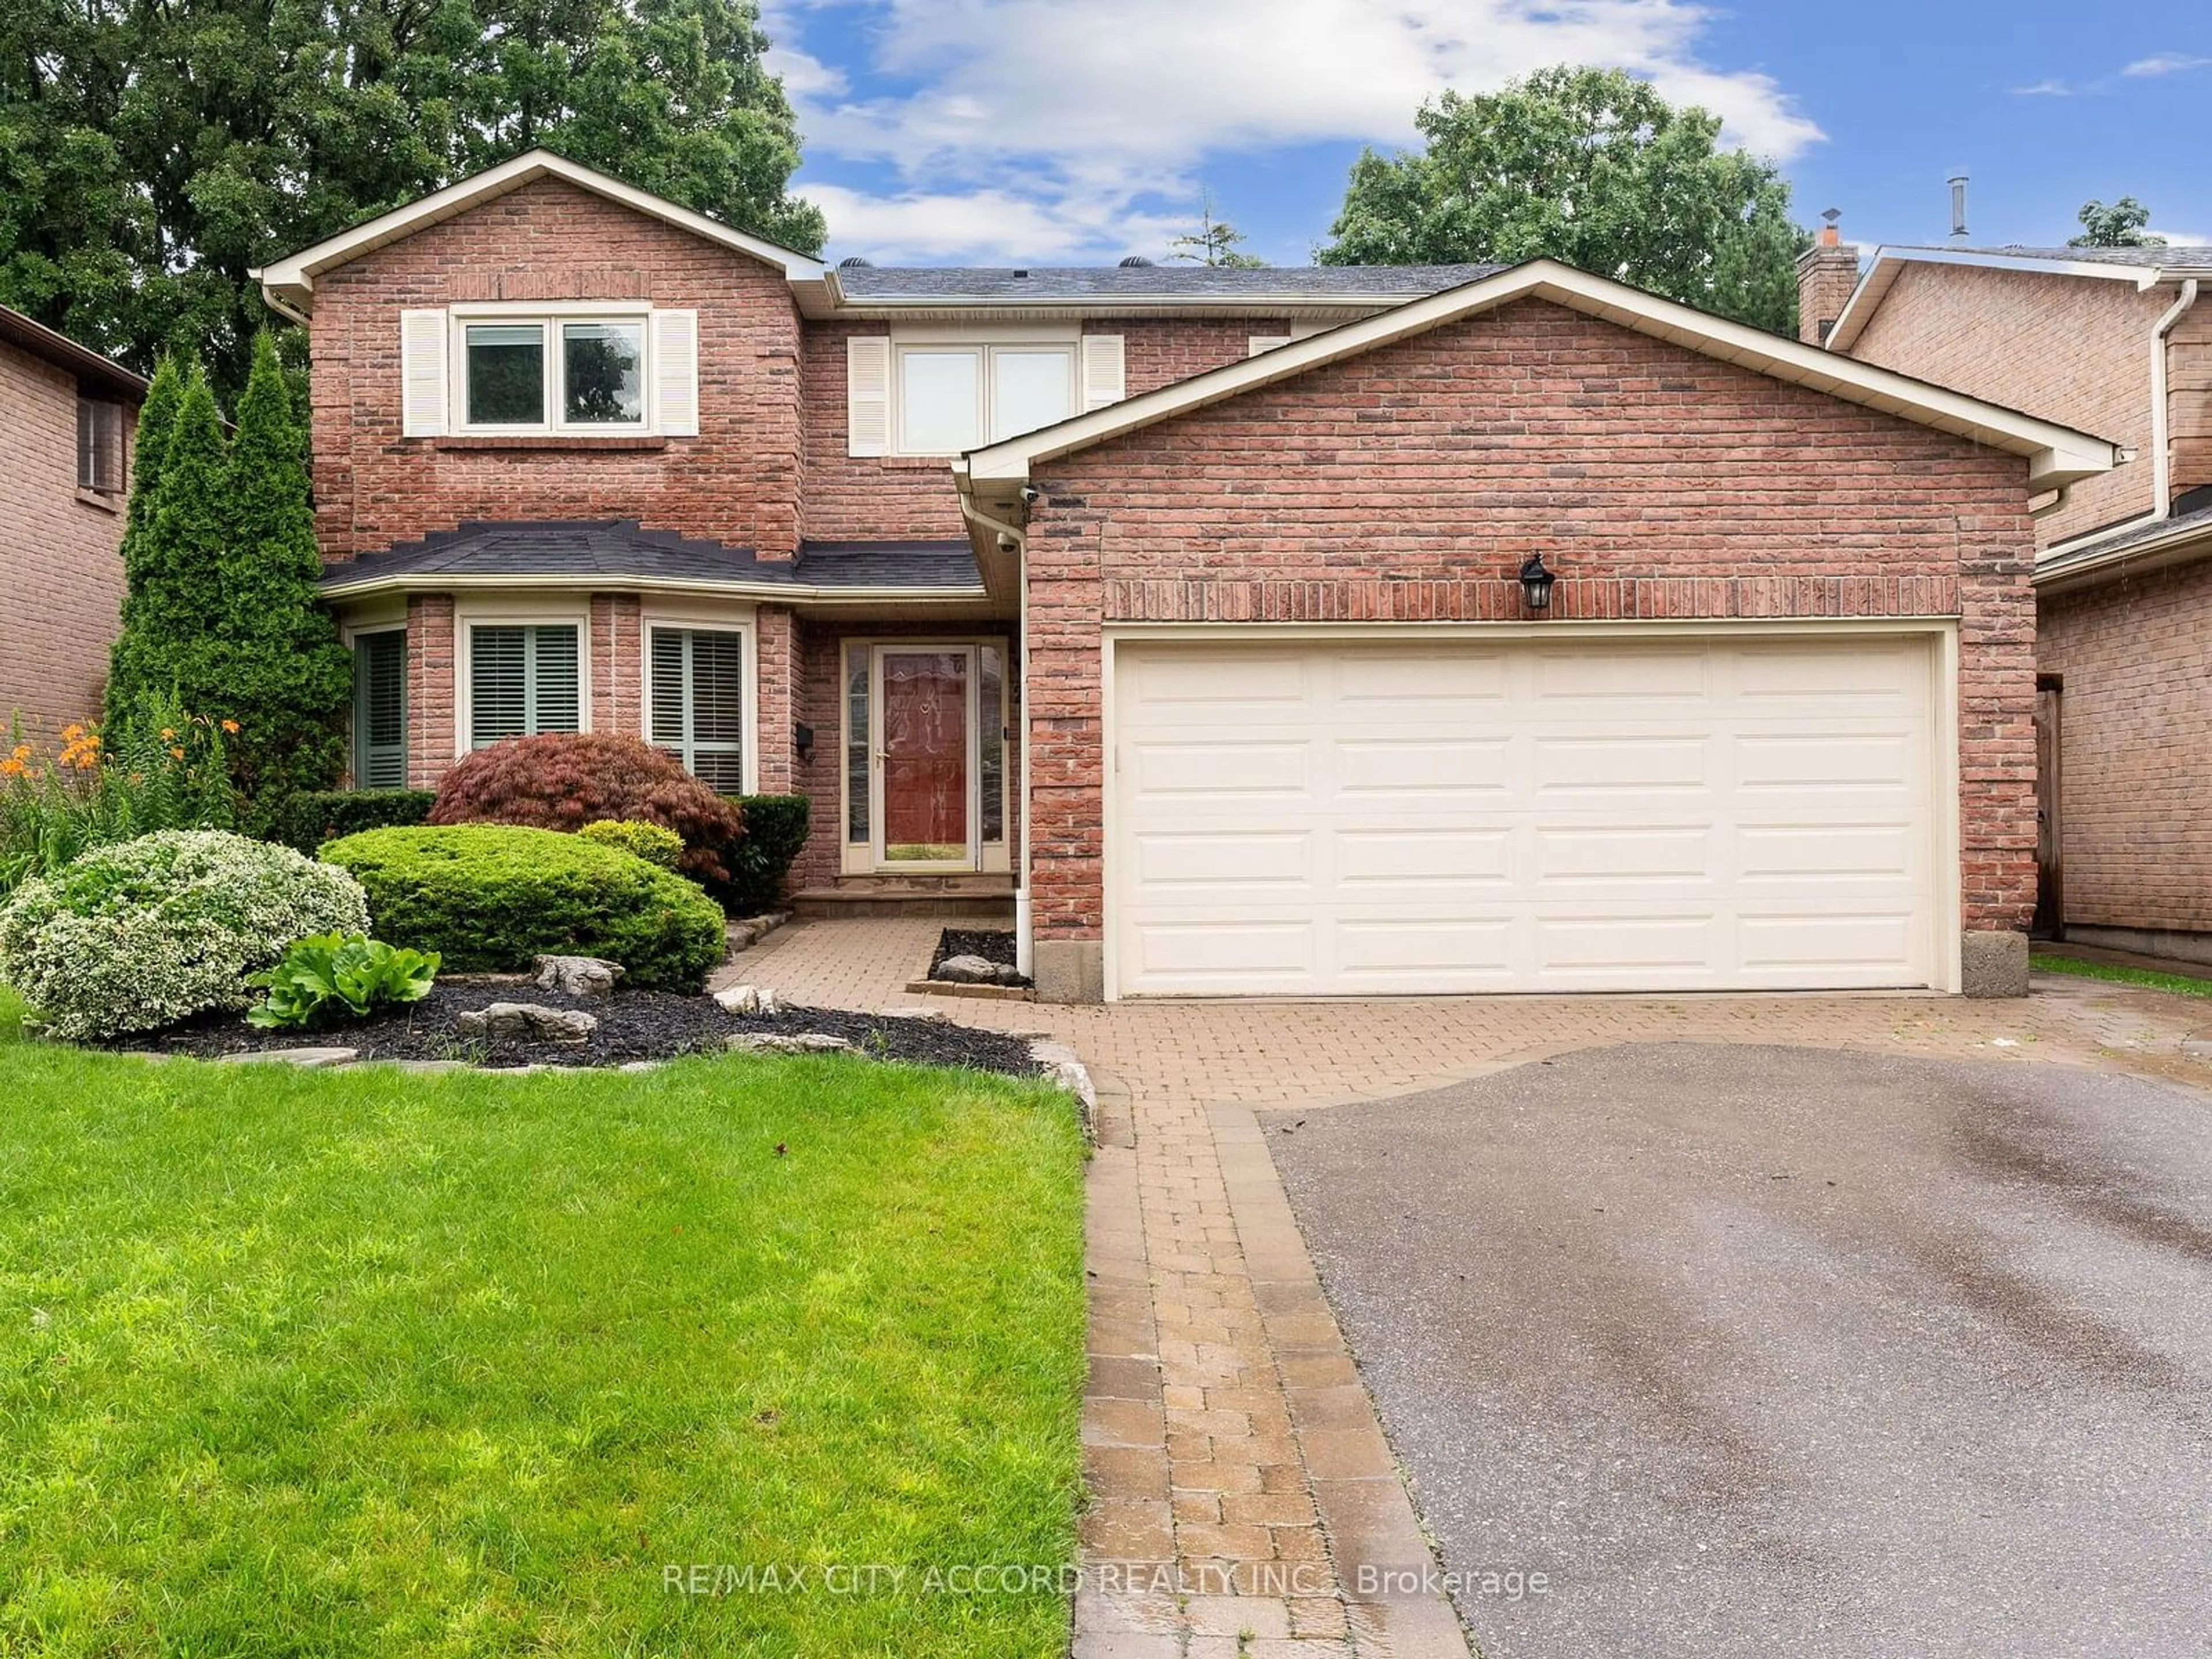 Home with brick exterior material for 28 Hastings Dr, Markham Ontario L3R 4N9